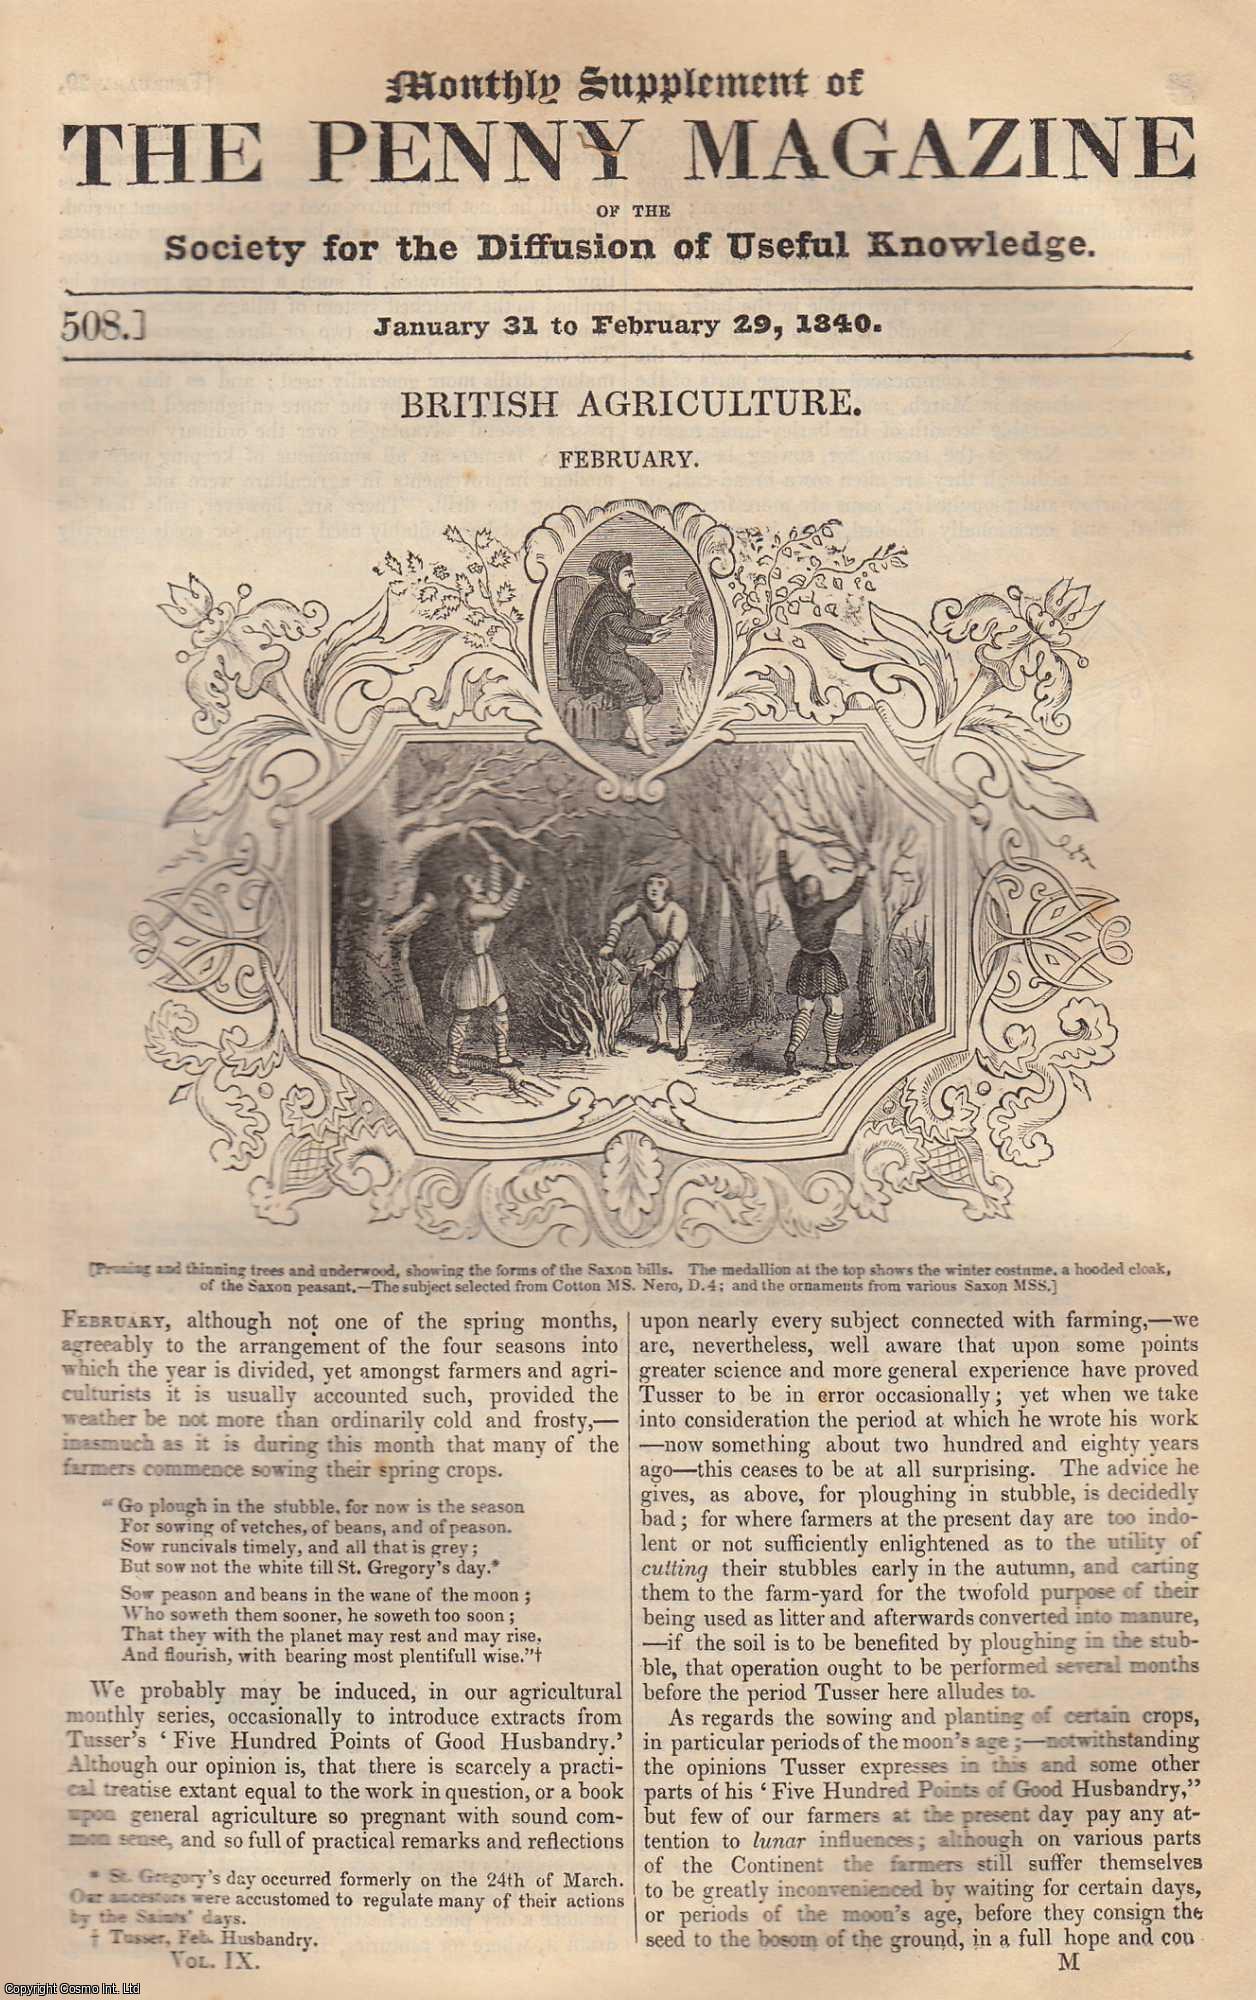 --- - British Agriculture (February). Issue No. 508, February 29th, 1840. A complete rare weekly issue of the Penny Magazine, 1840.